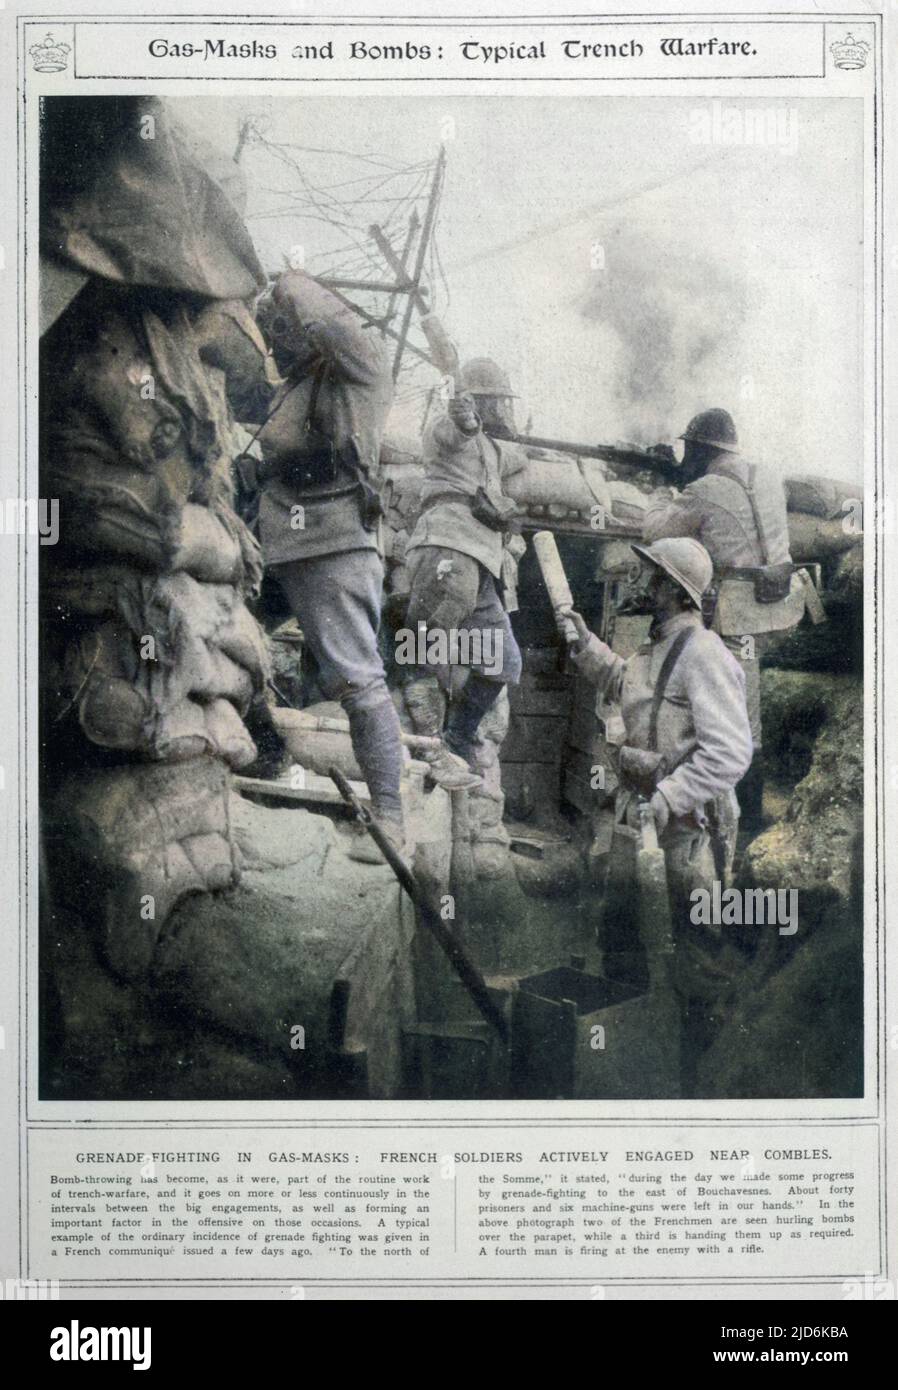 French soldiers throwing grenades while wearing gas masks during combat near Combles, France. Colourised version of: 10008100       Date: Oct-16 Stock Photo